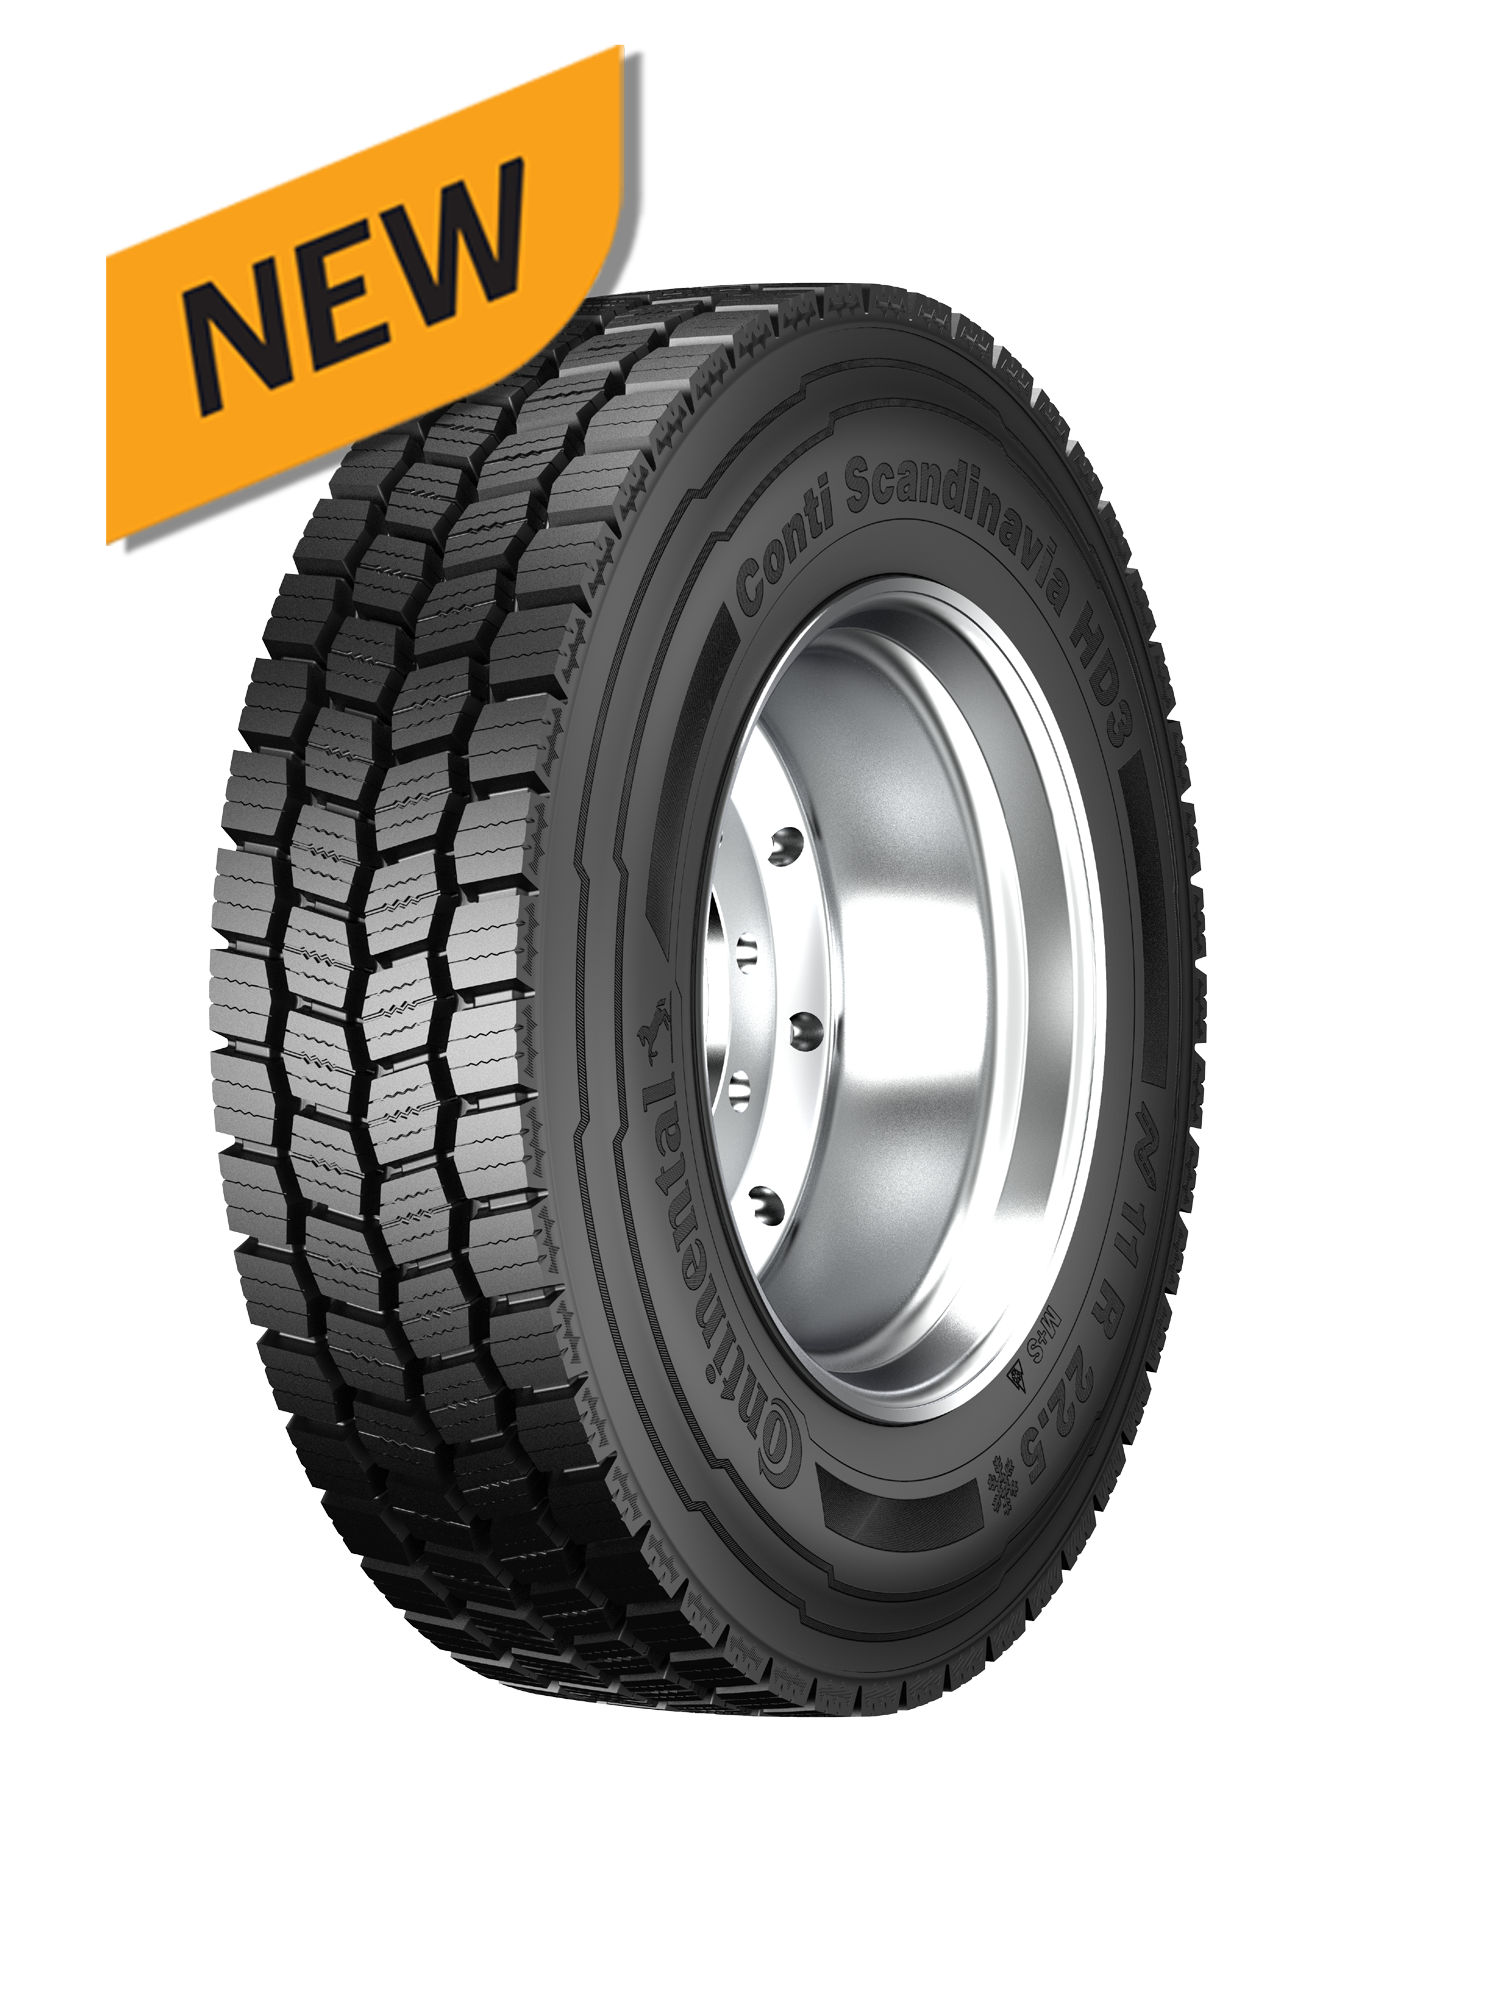 The new Conti Scandinavia HD3 tire is 3PMSF Certified and performs well in snow + mud.